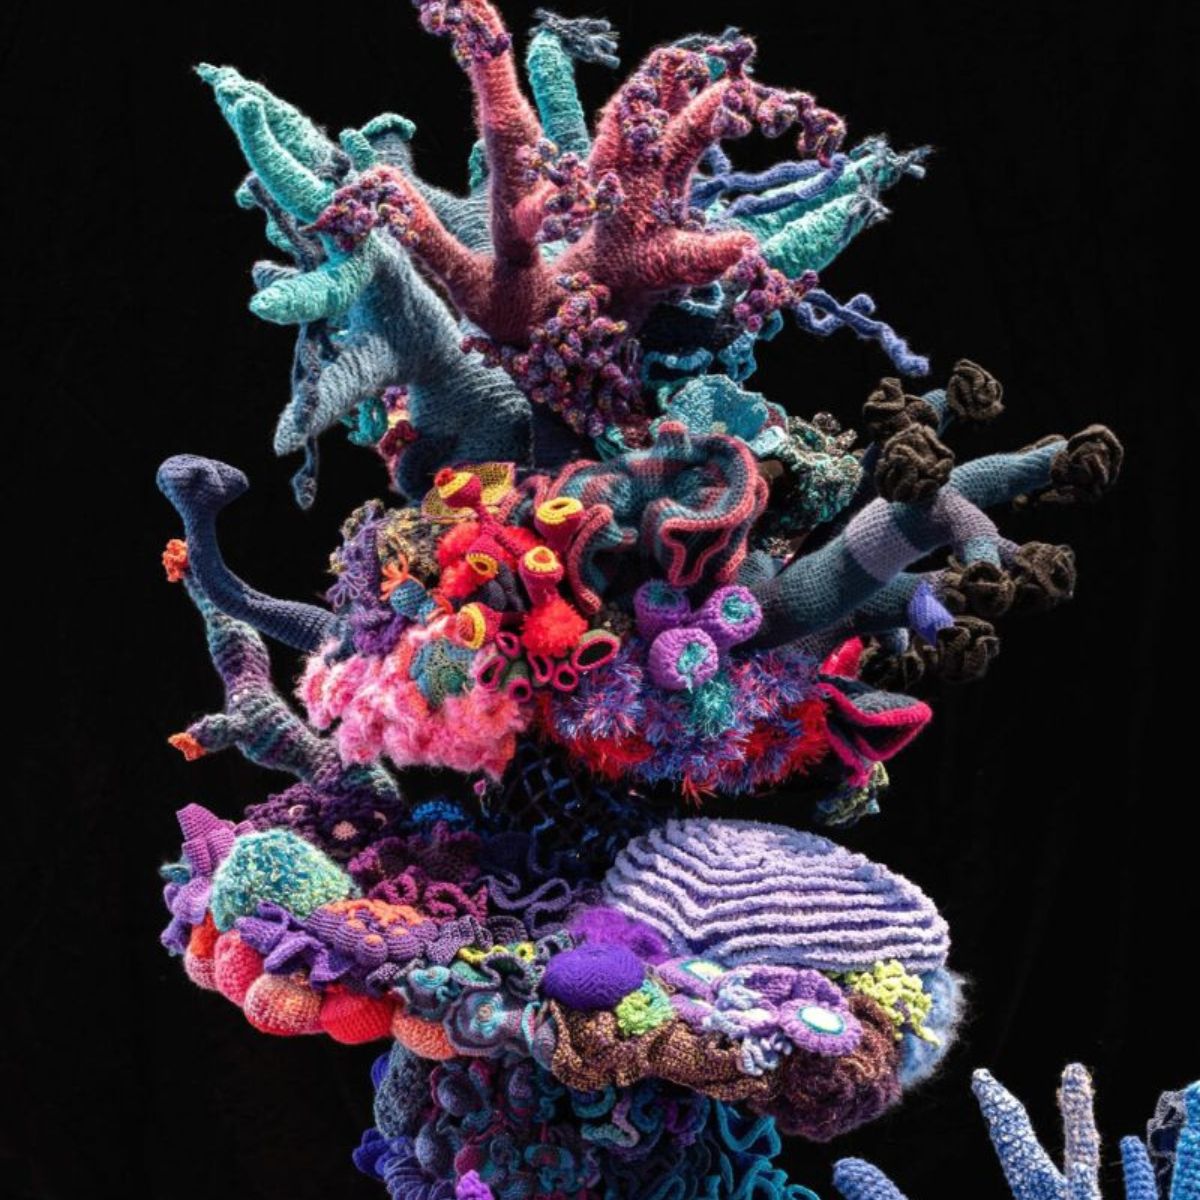 coral-ecosystem-of-thousands-of-crocheted-sculptures-featured